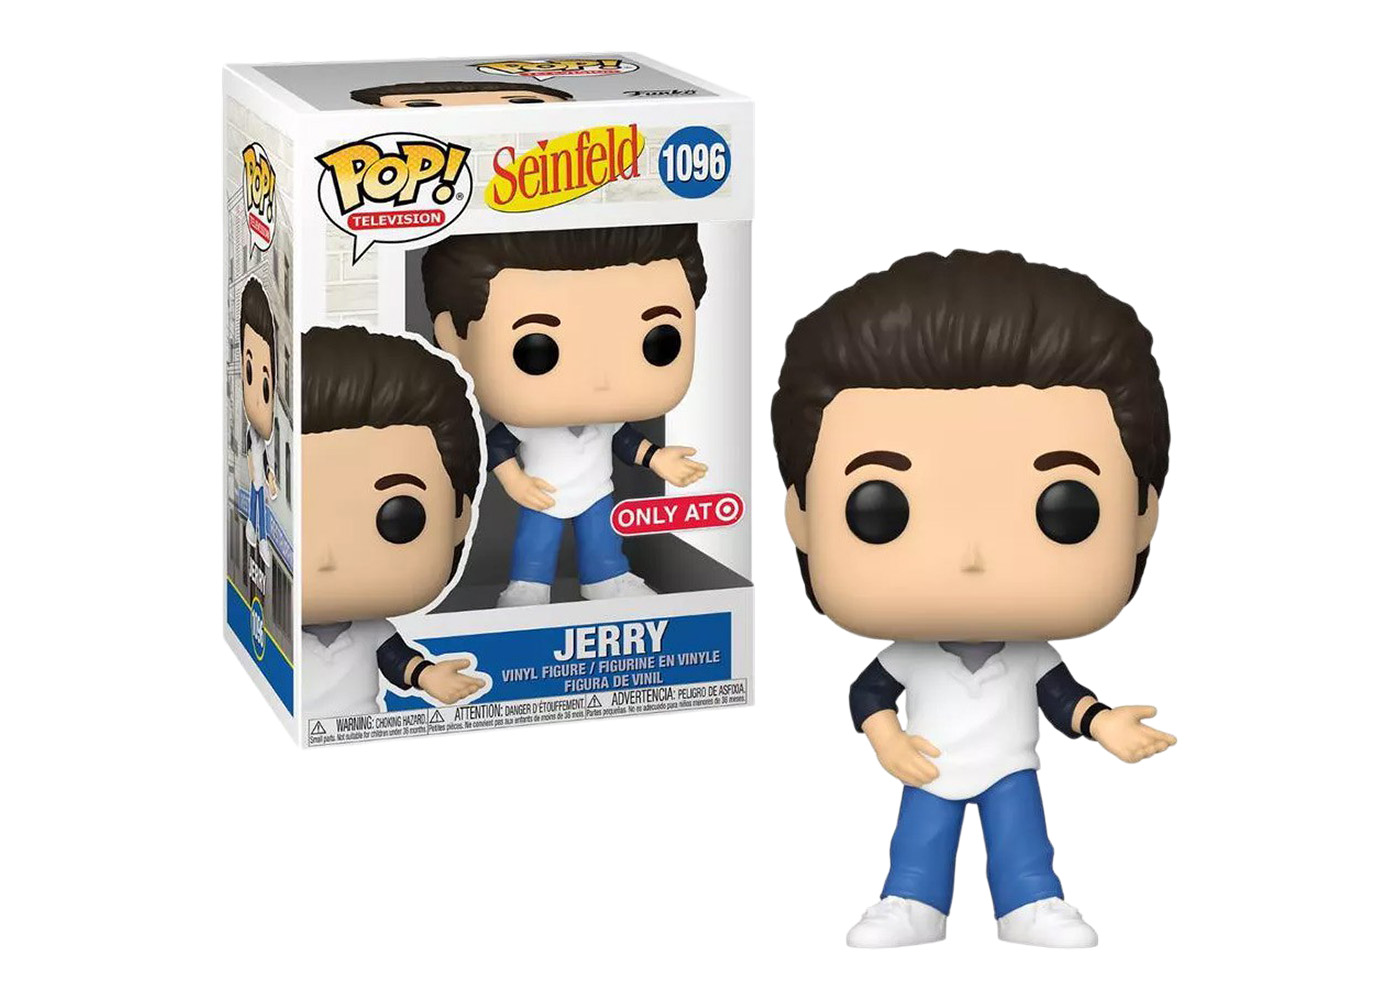 Television Seinfeld Jerry 1096 Target Exclusive VHTF Ready to Ship Funko Pop 